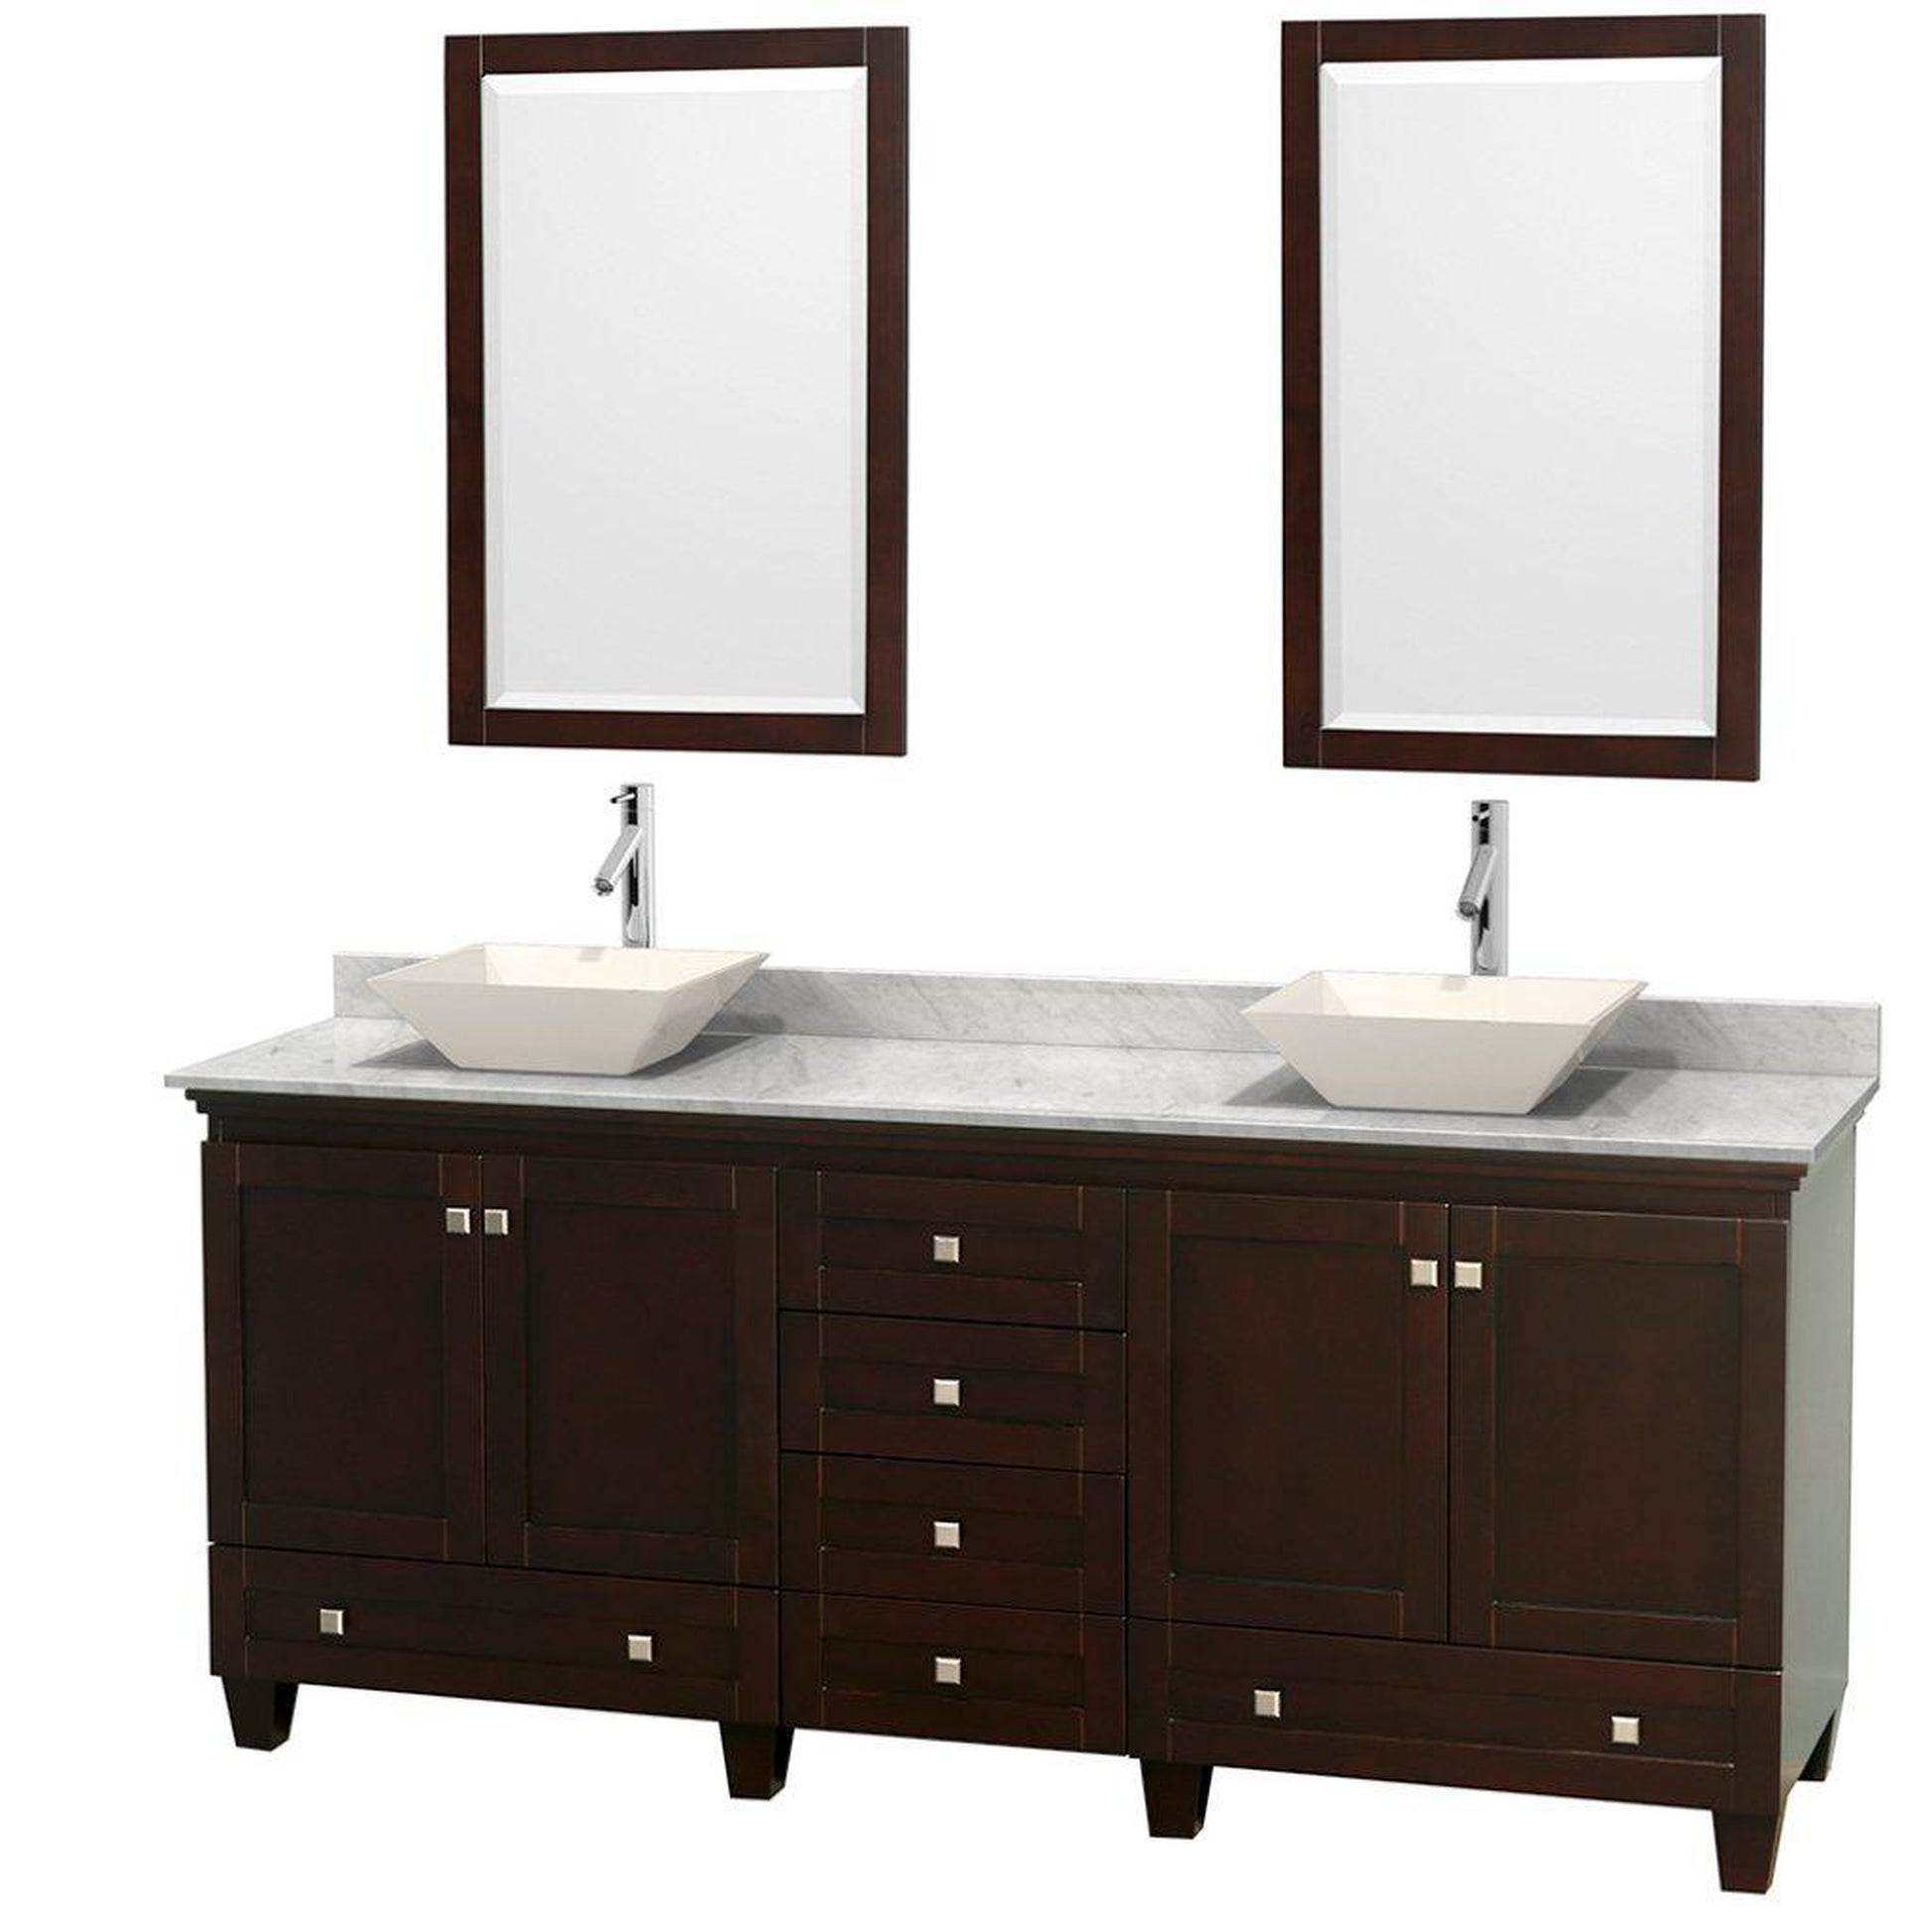 Wyndham Collection Acclaim 80" Double Bathroom Espresso Vanity With White Carrara Marble Countertop And Pyra Bone Porcelain Sinks And 2 Set Of 24" Mirror